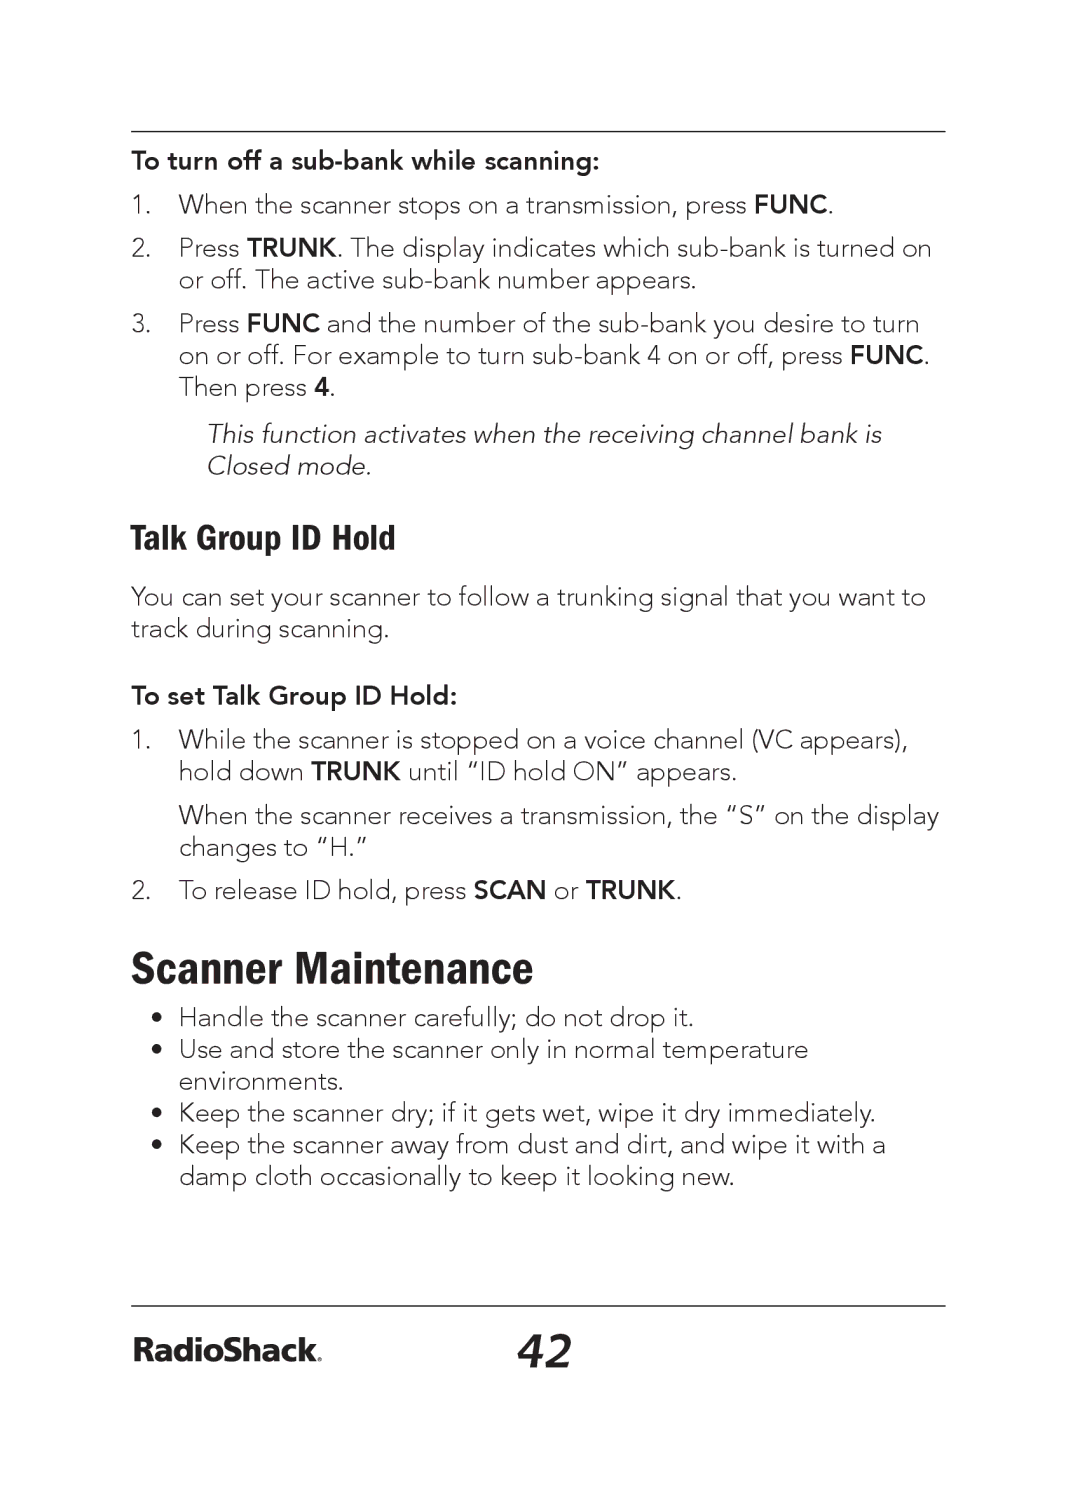 Radio Shack 20-163 manual Scanner Maintenance, Talk Group ID Hold, To turn off a sub-bank while scanning 